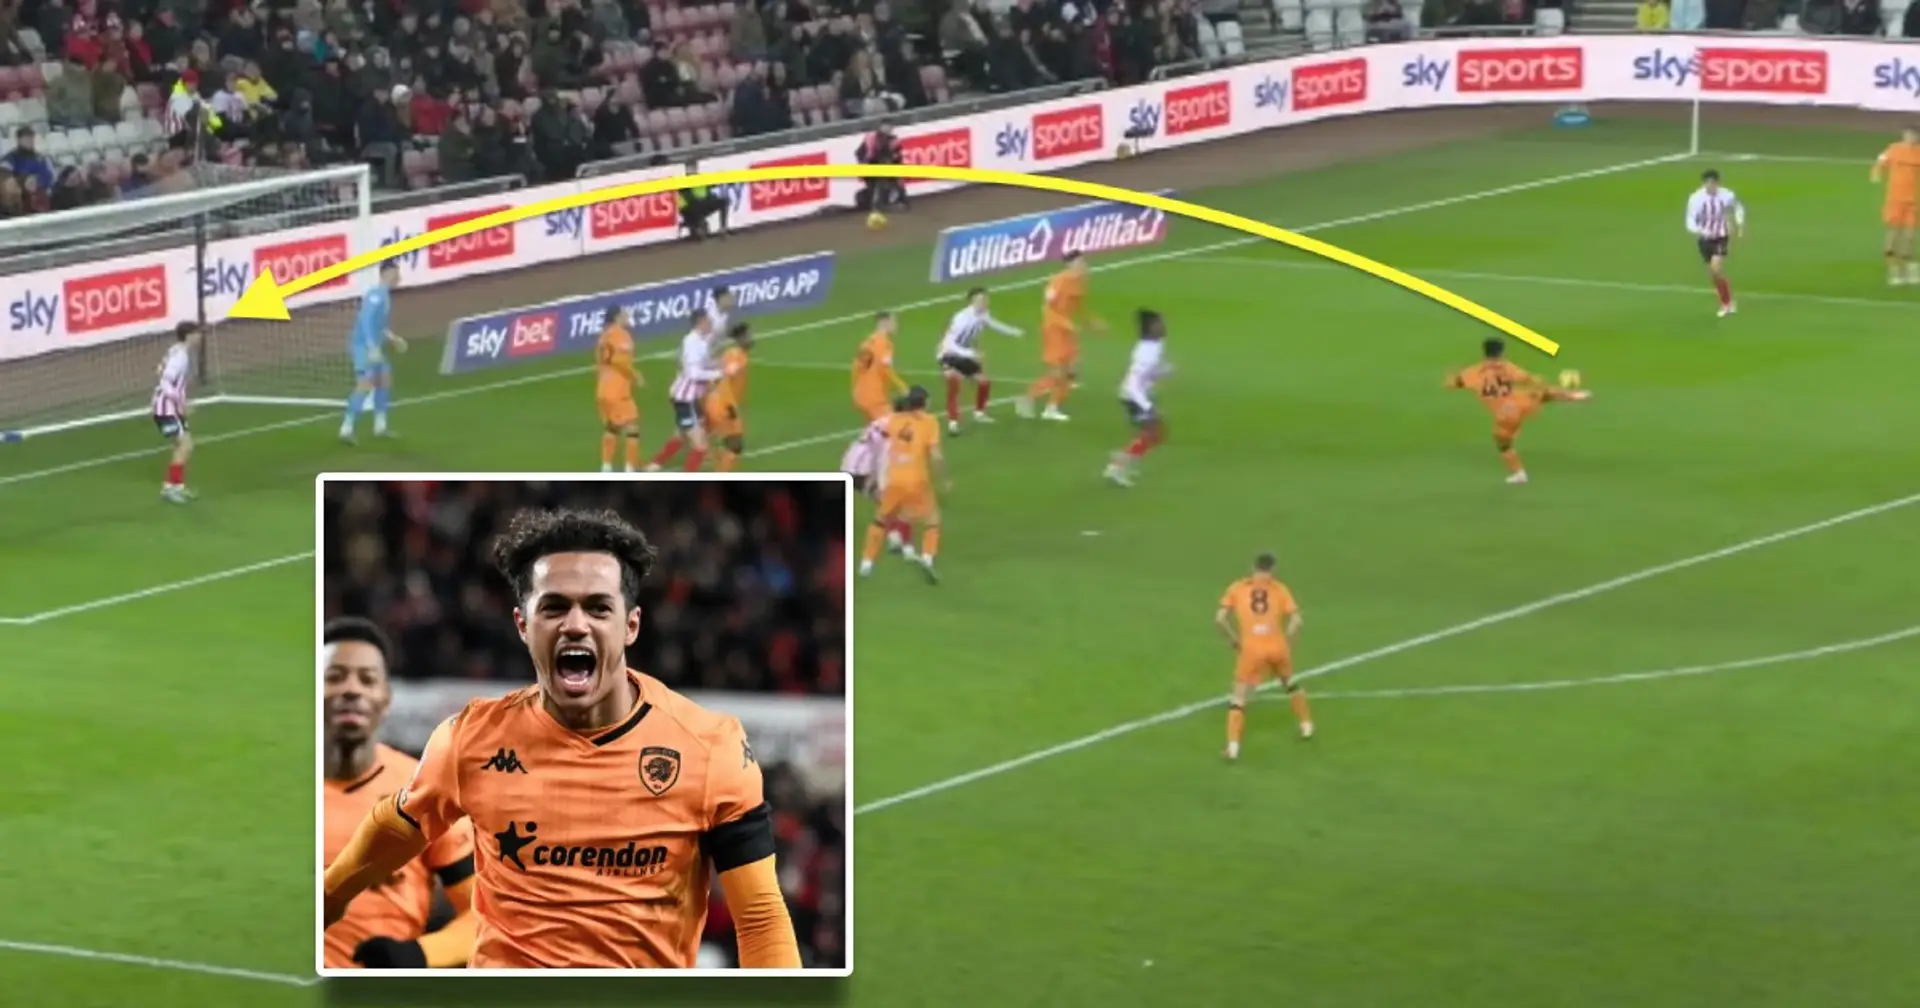 Fabio Carvalho scores stunning volley from Tyler Morton cross to get Hull City a late win (video)